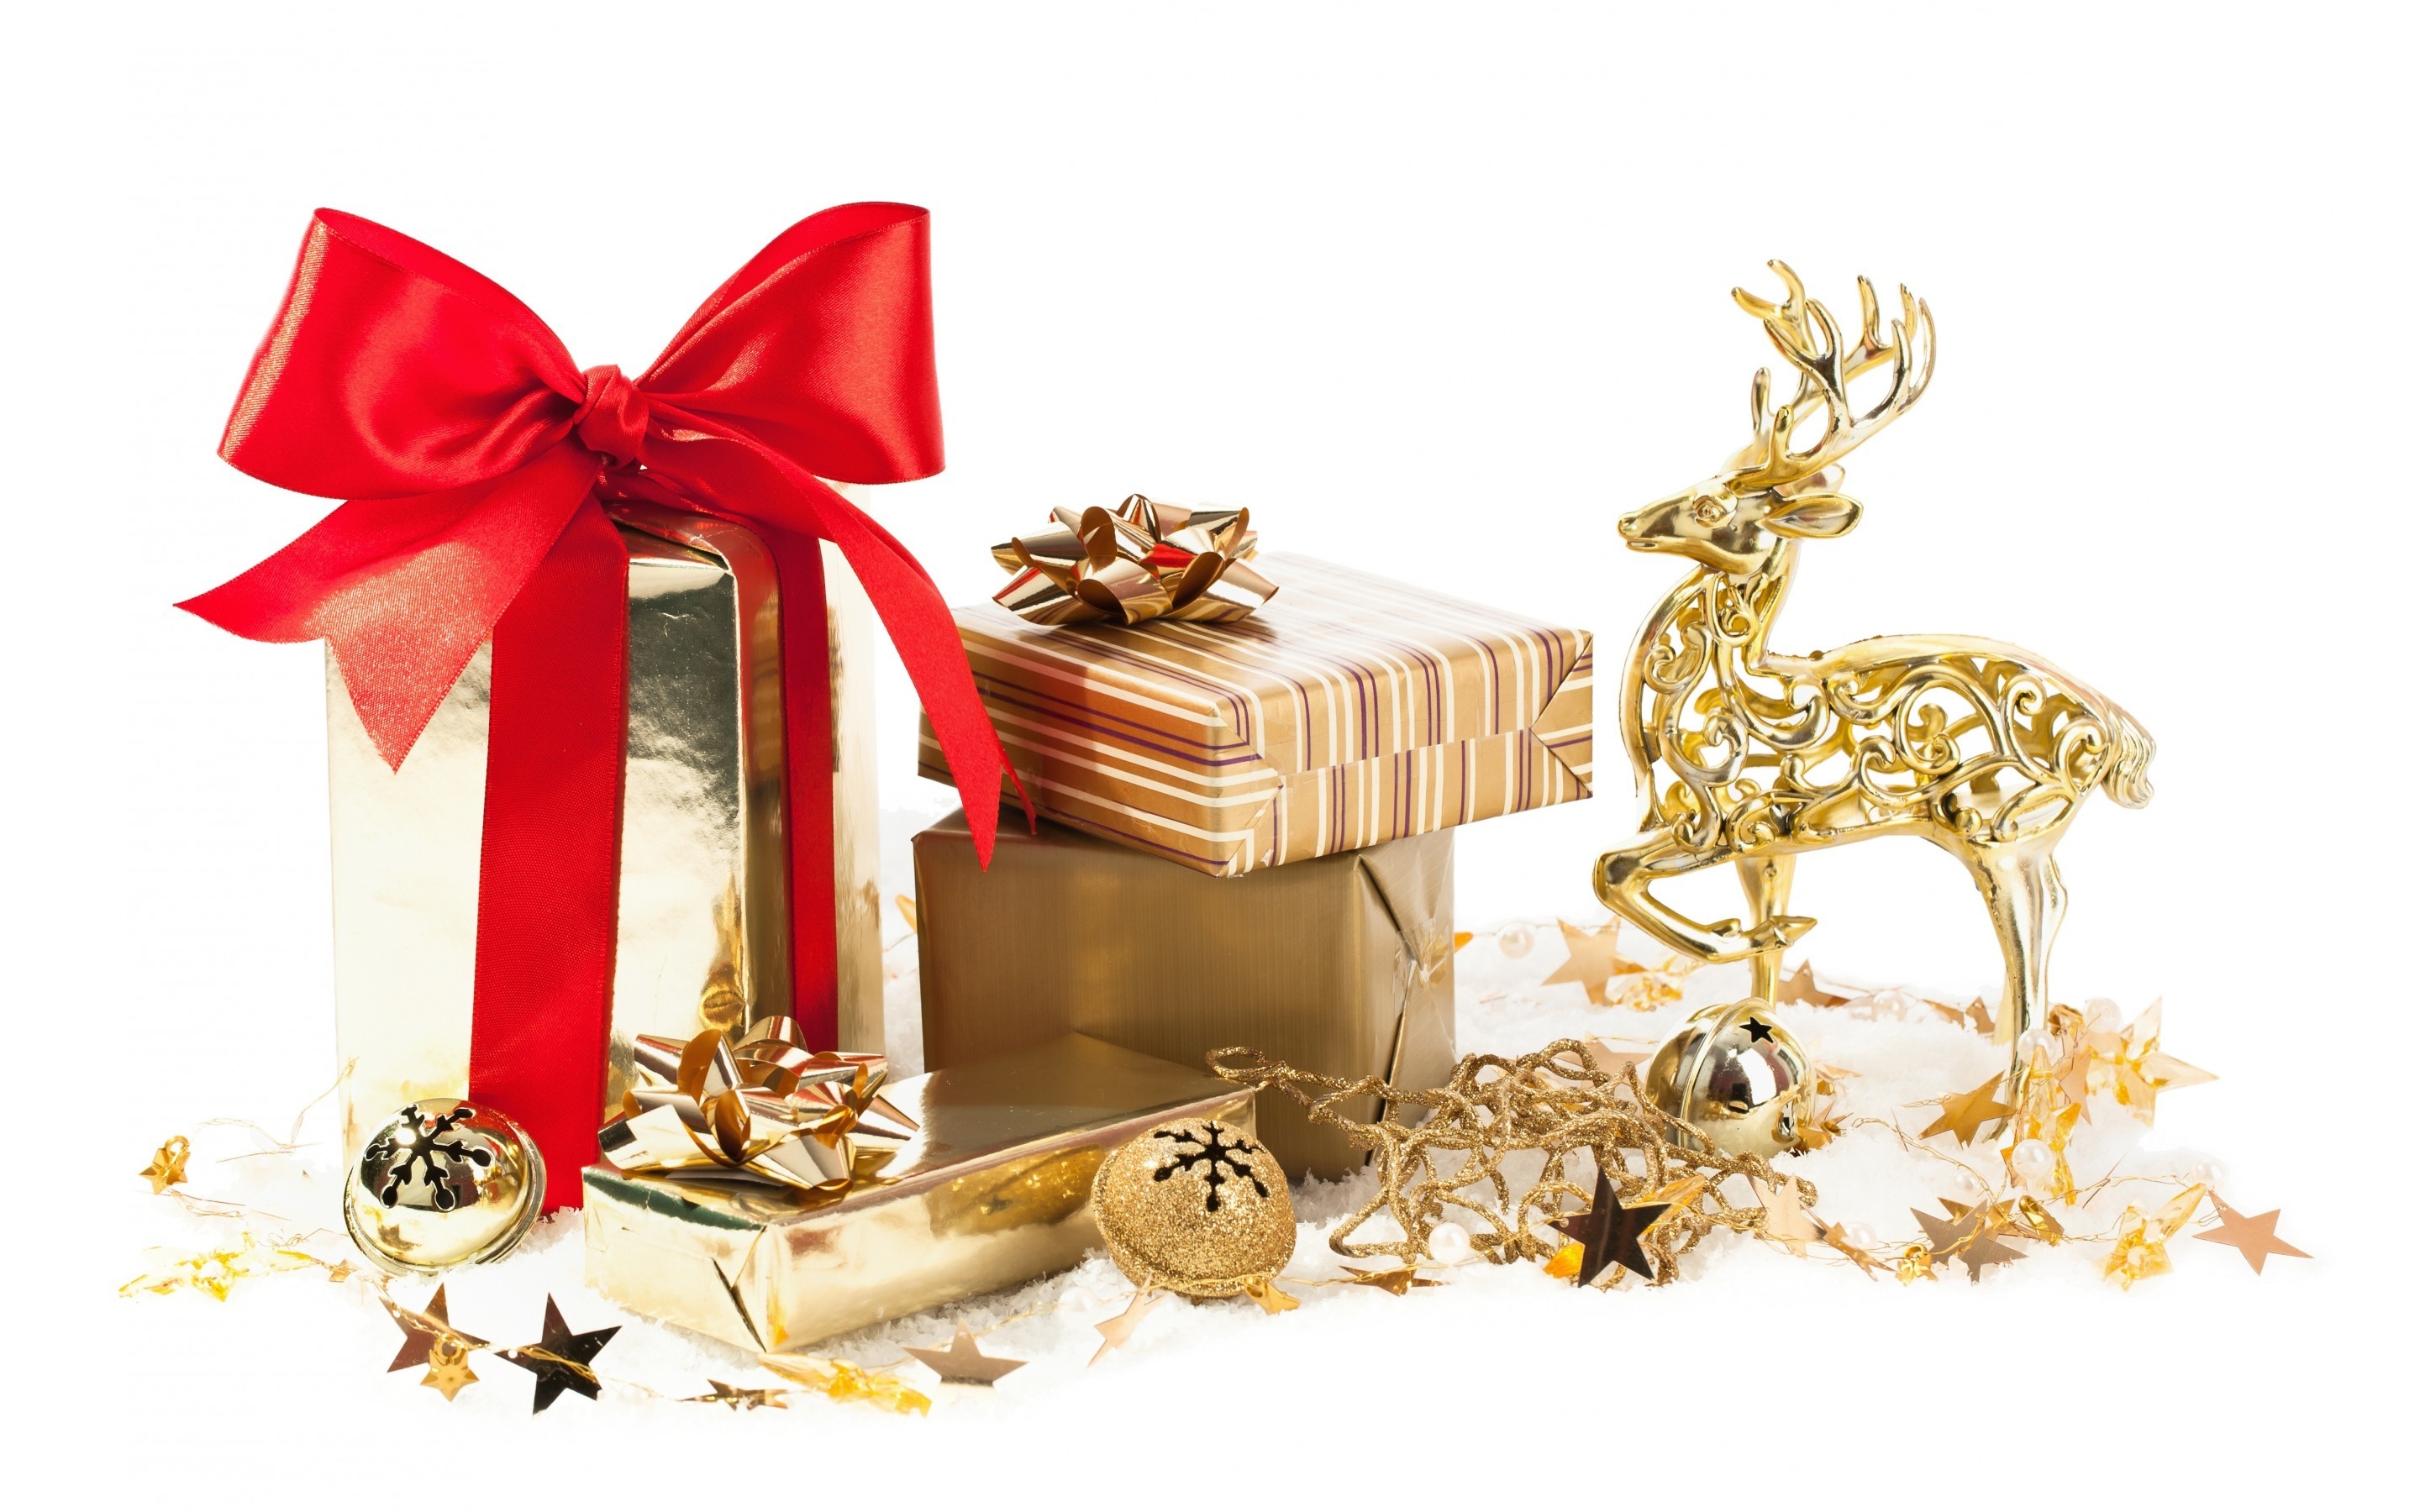 Ready Gifts for Christmas for 2880 x 1800 Retina Display resolution